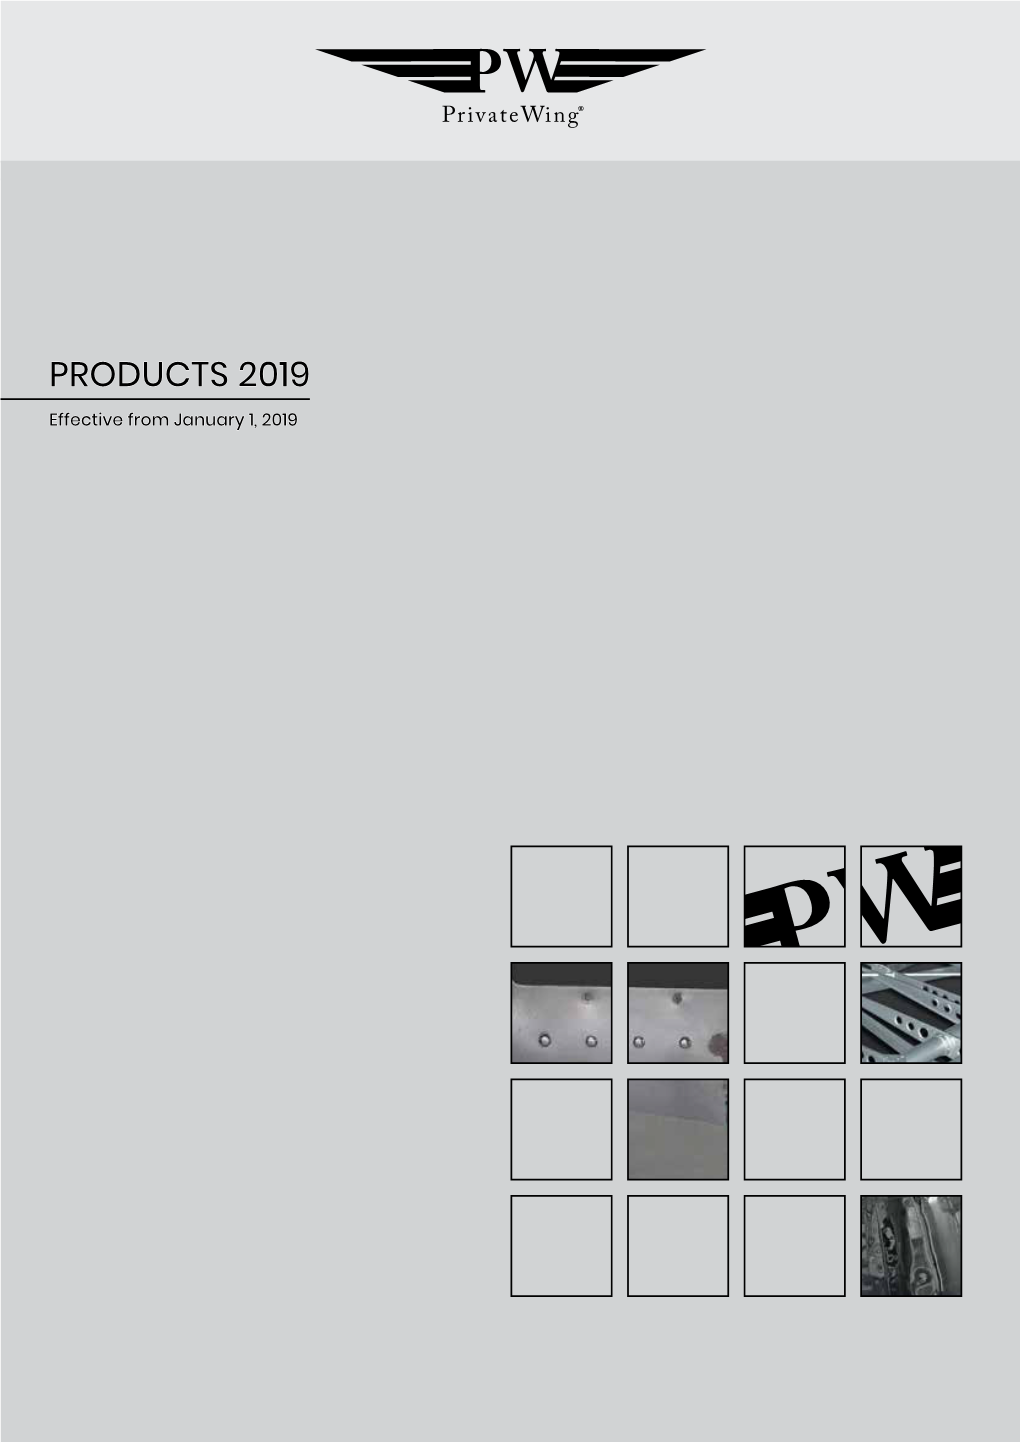 PRODUCTS 2019 Effective from January 1, 2019